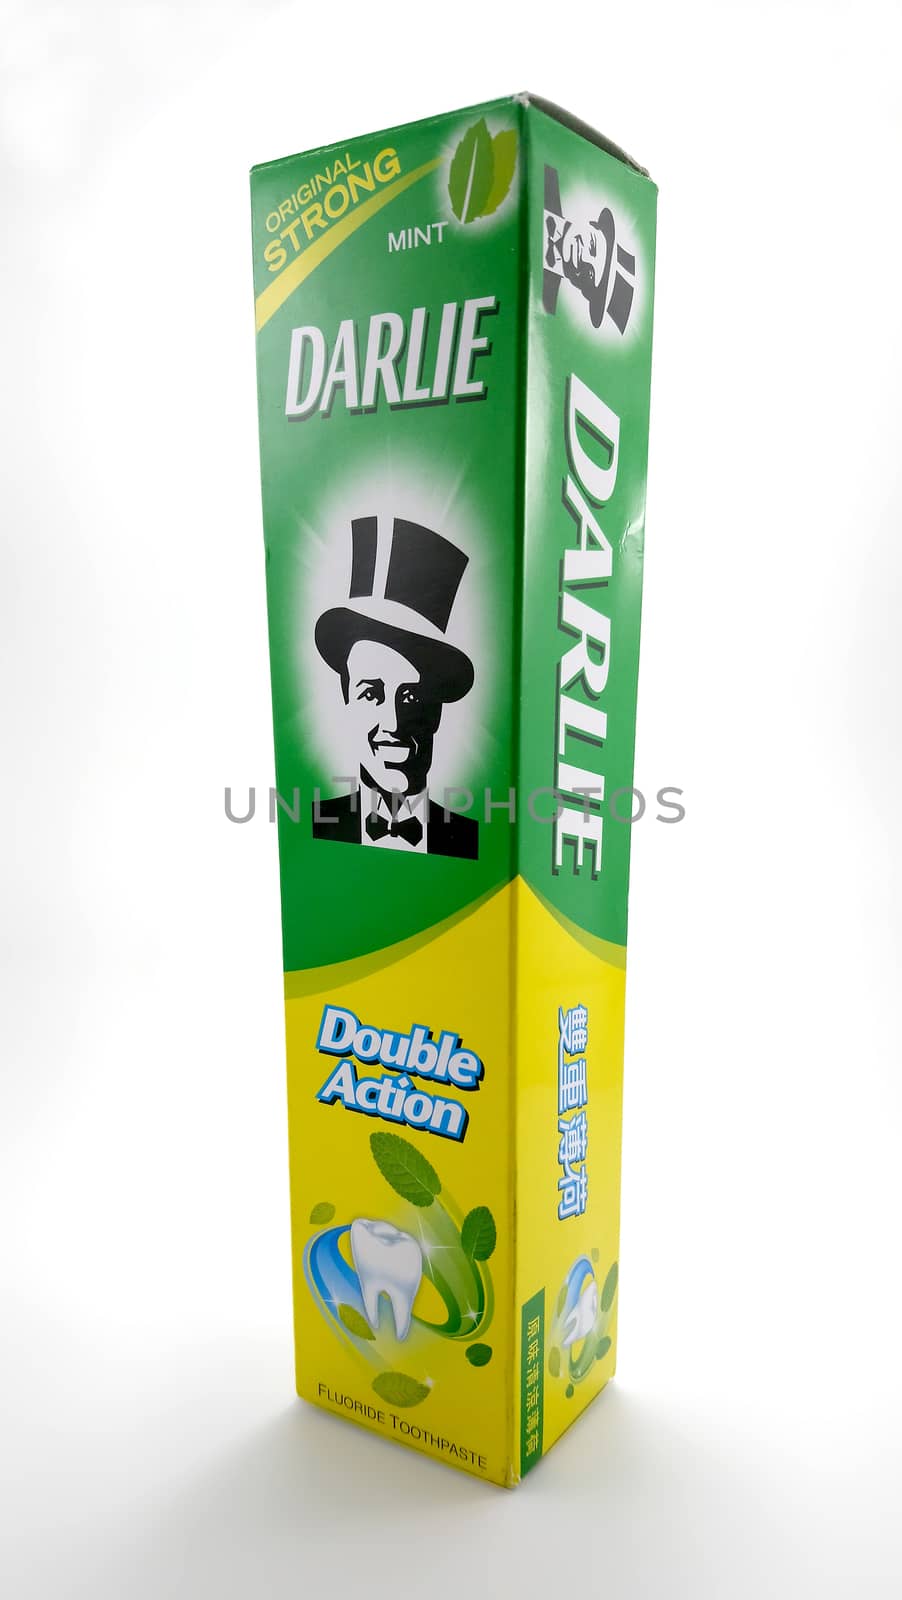 Darlie mint original strong toothpaste in Manila, Philippines by imwaltersy